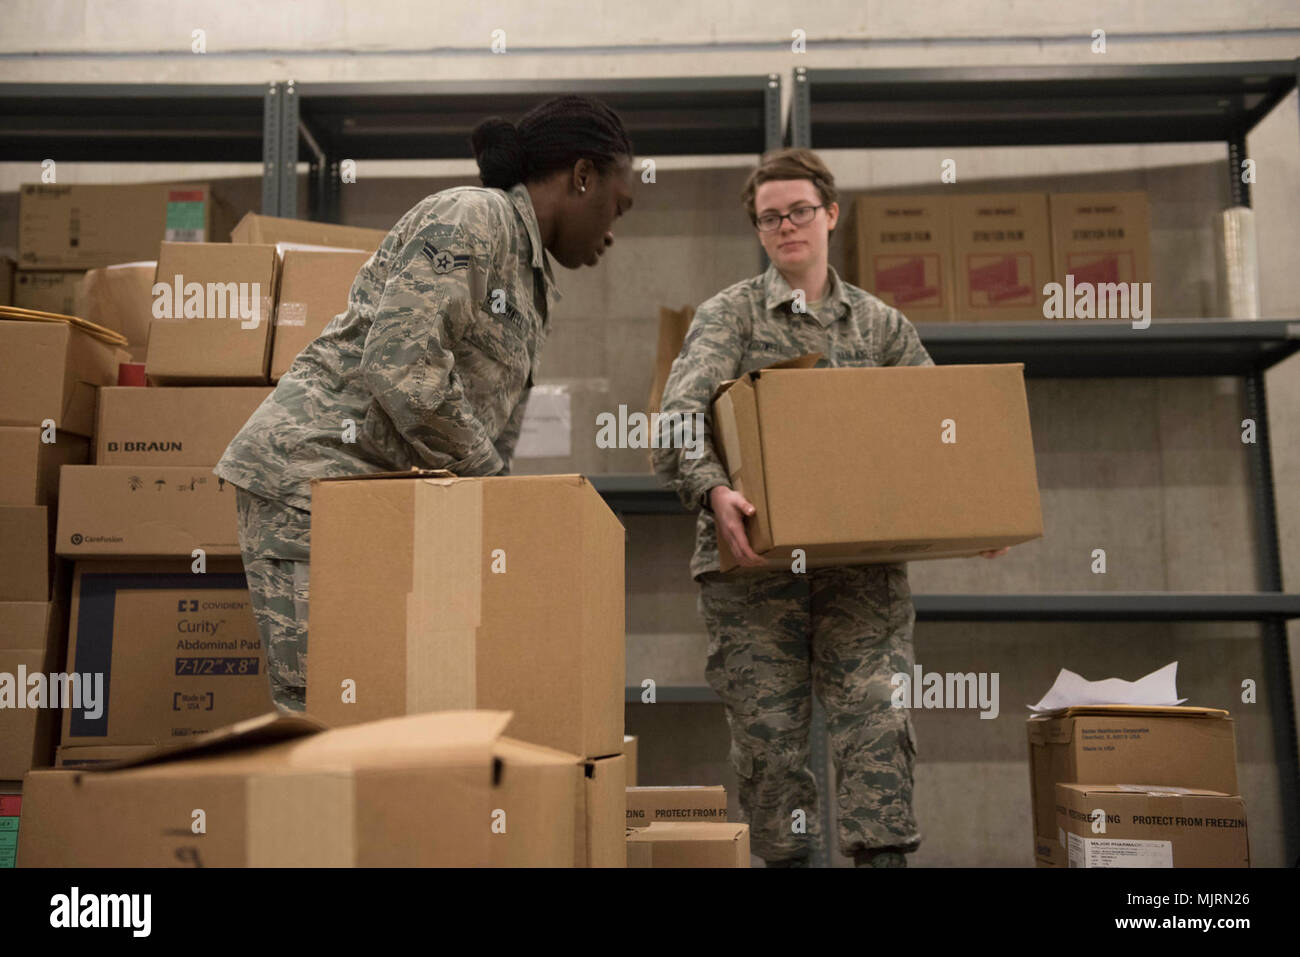 U.S. Air Force Airman 1st Class’ Ashley Cromwell, left, and Gabrielle McDowell, right, both 18th Medical Group medical material technicians, stack boxes of medical supplies for palletizing March 21, 2018, at Kadena Air Base, Japan. Many items, such as first-aid kits and medications, must be checked for quality before they can leave the warehouse. Armed Forces and civilians displaying courage bravery dedication commitment and sacrifice Stock Photo